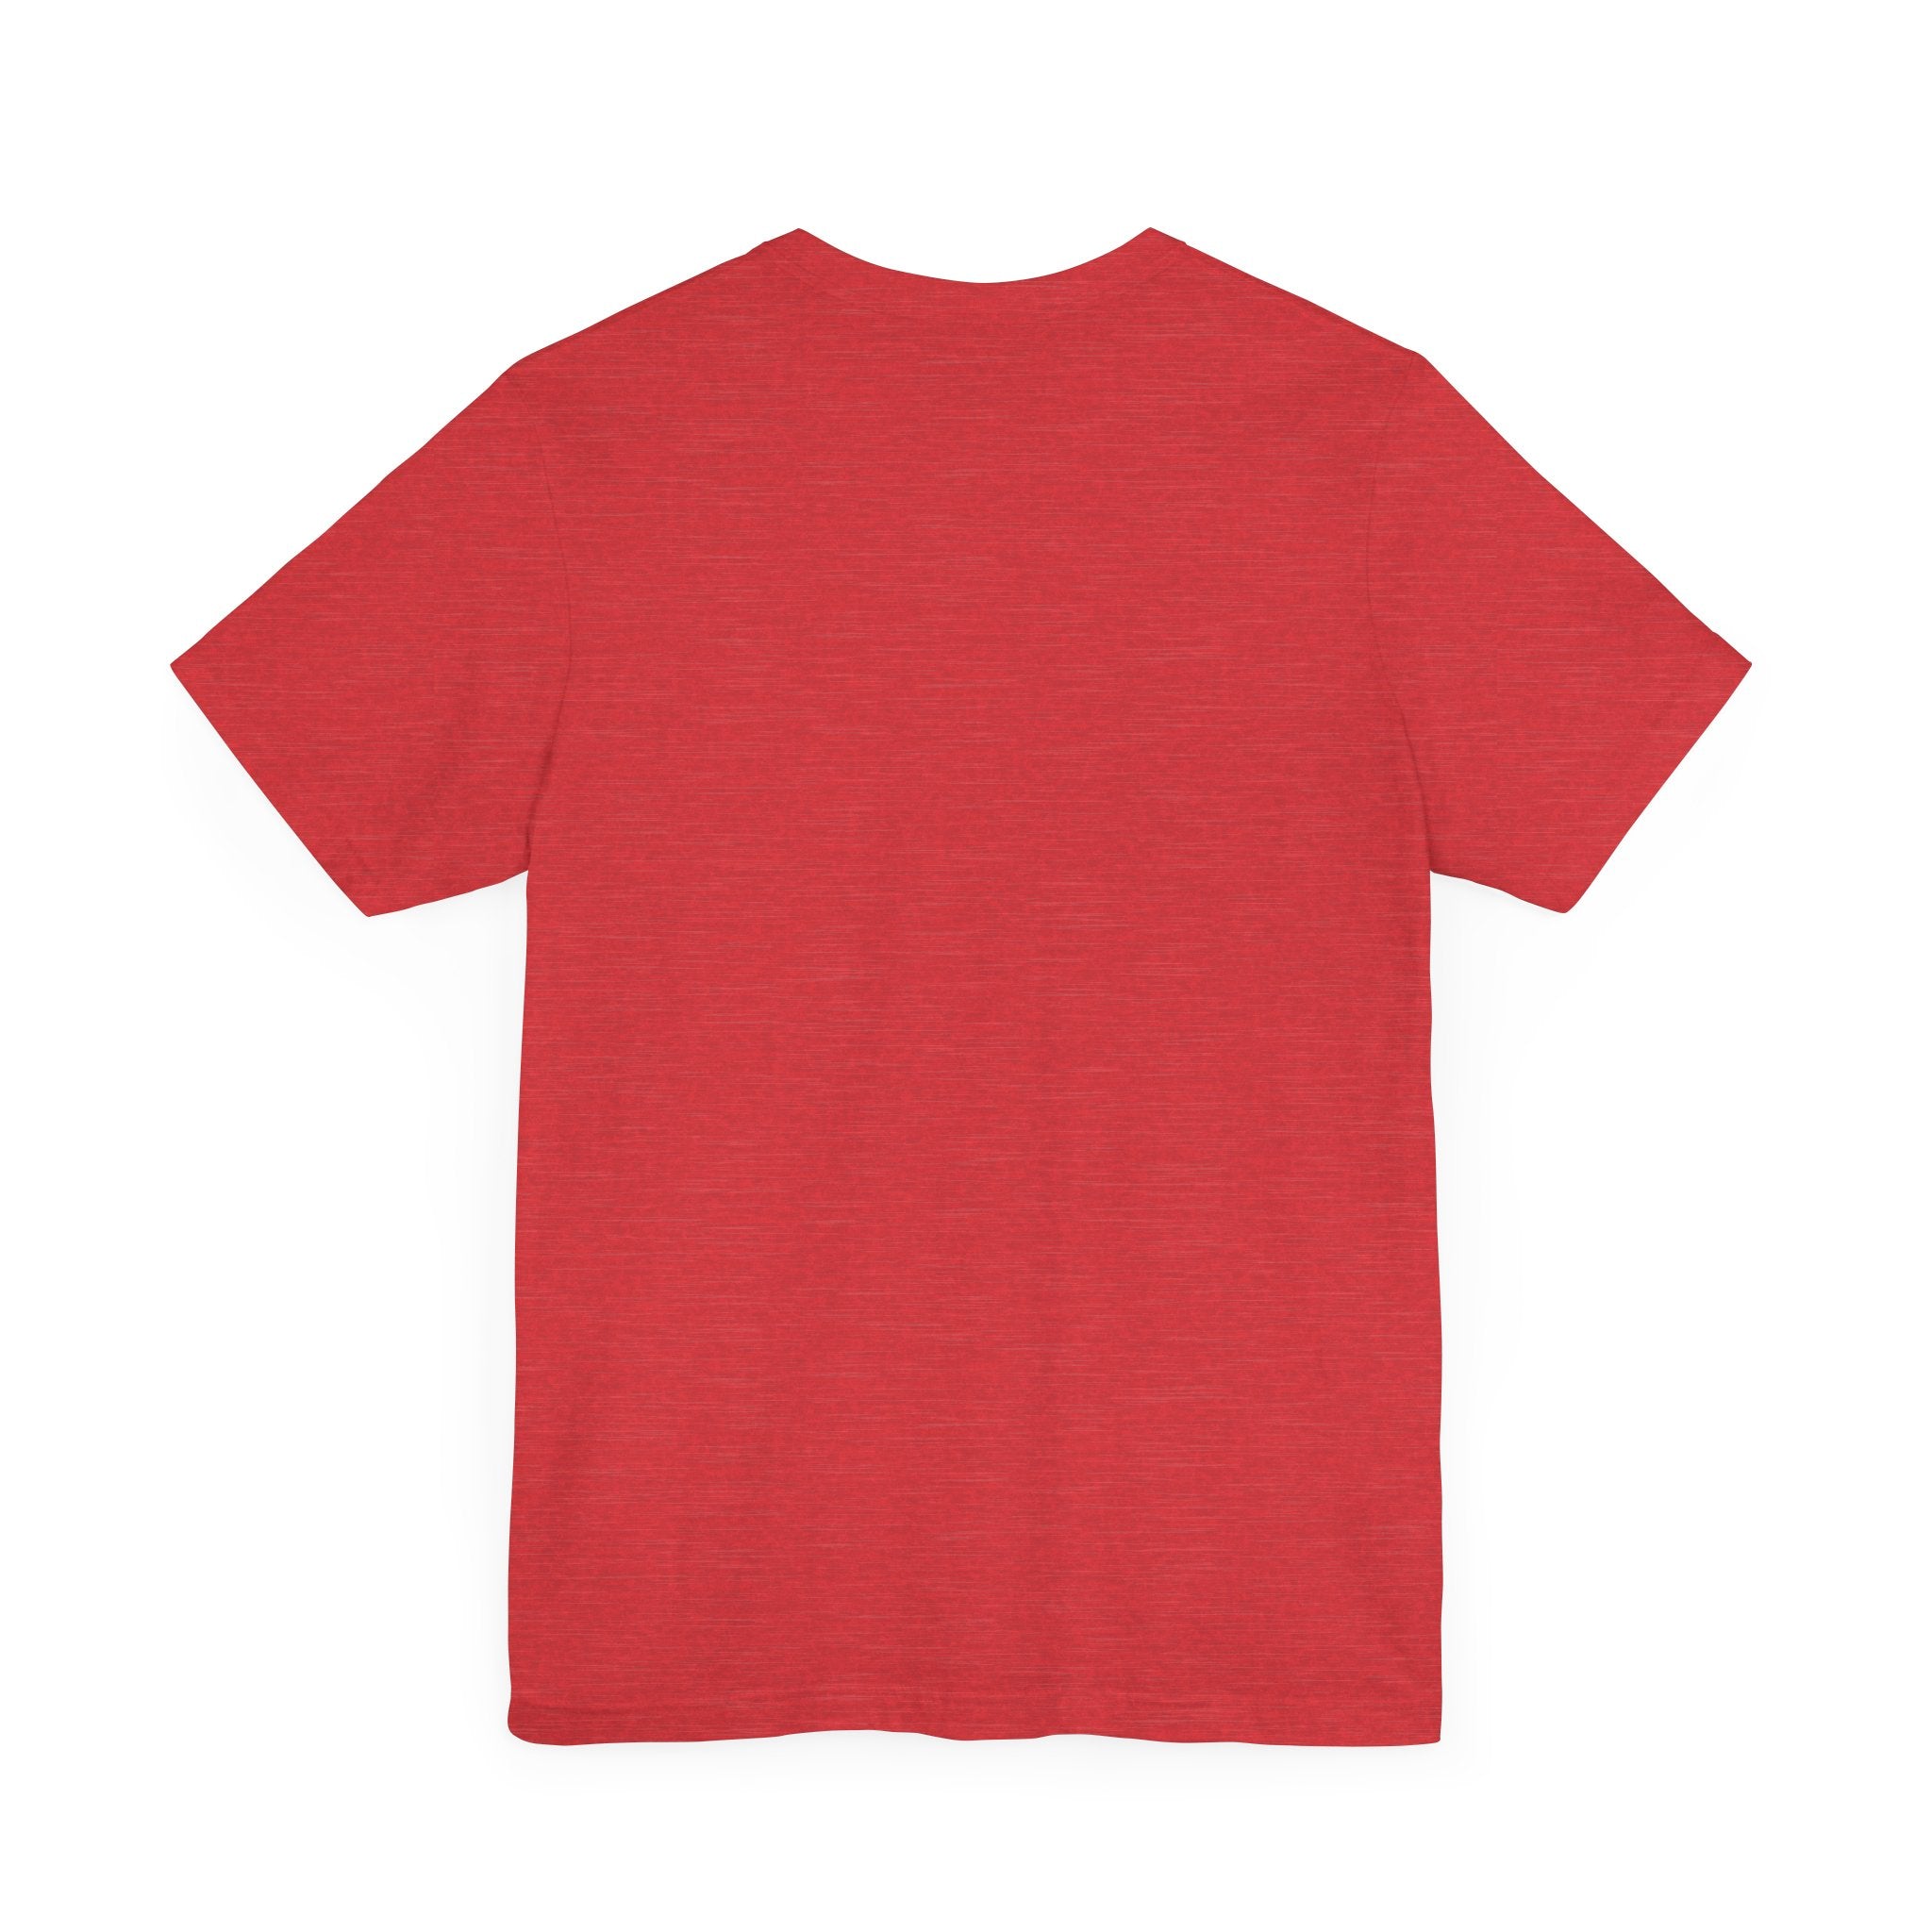 Back view of a plain red Binary Rain Cloud - T-Shirt, crafted from Airlume combed, ring-spun cotton, on a white background.